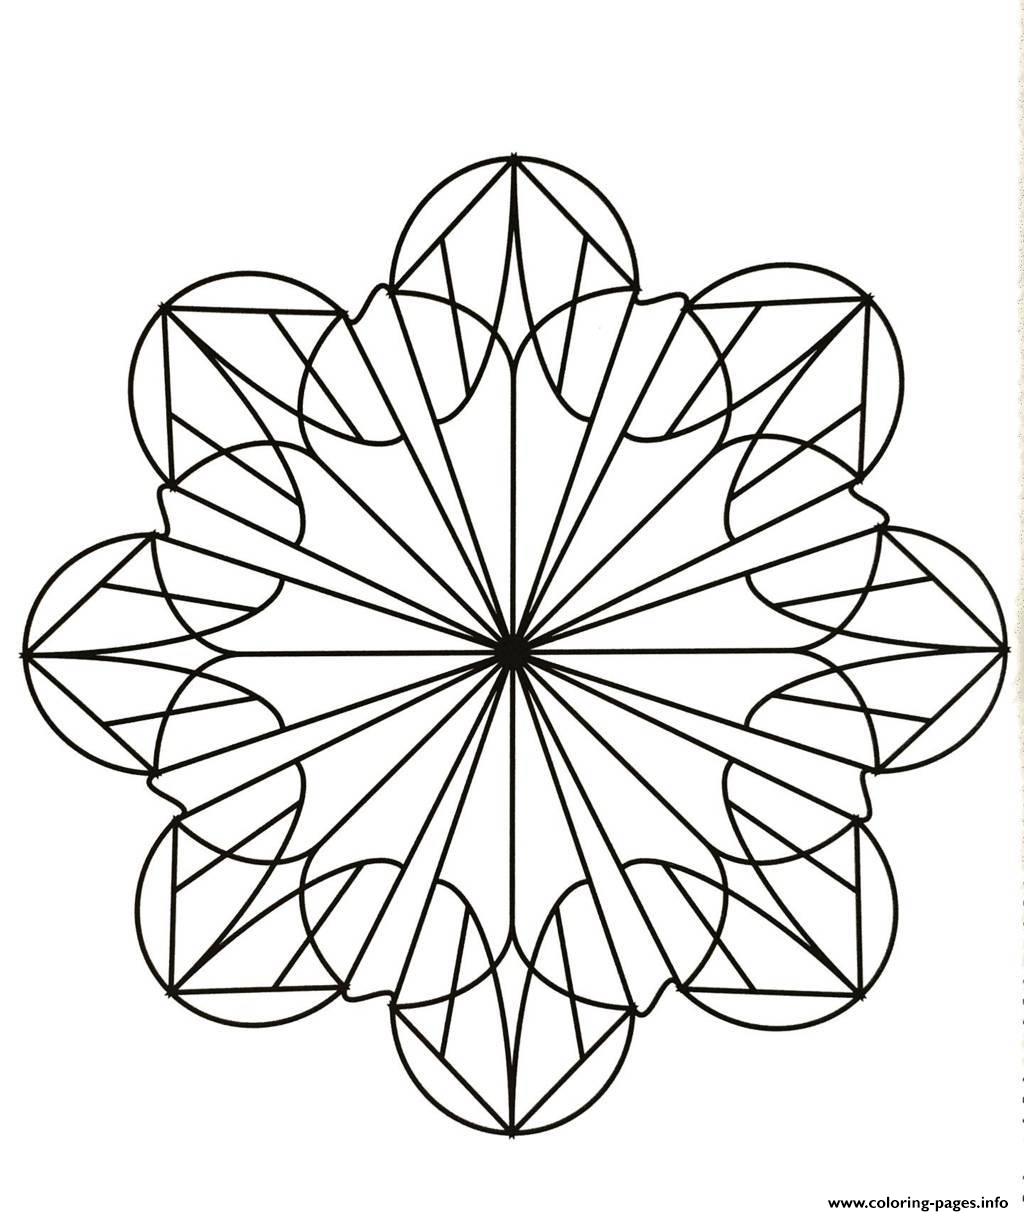 Mandalas To Download For Free 19  coloring